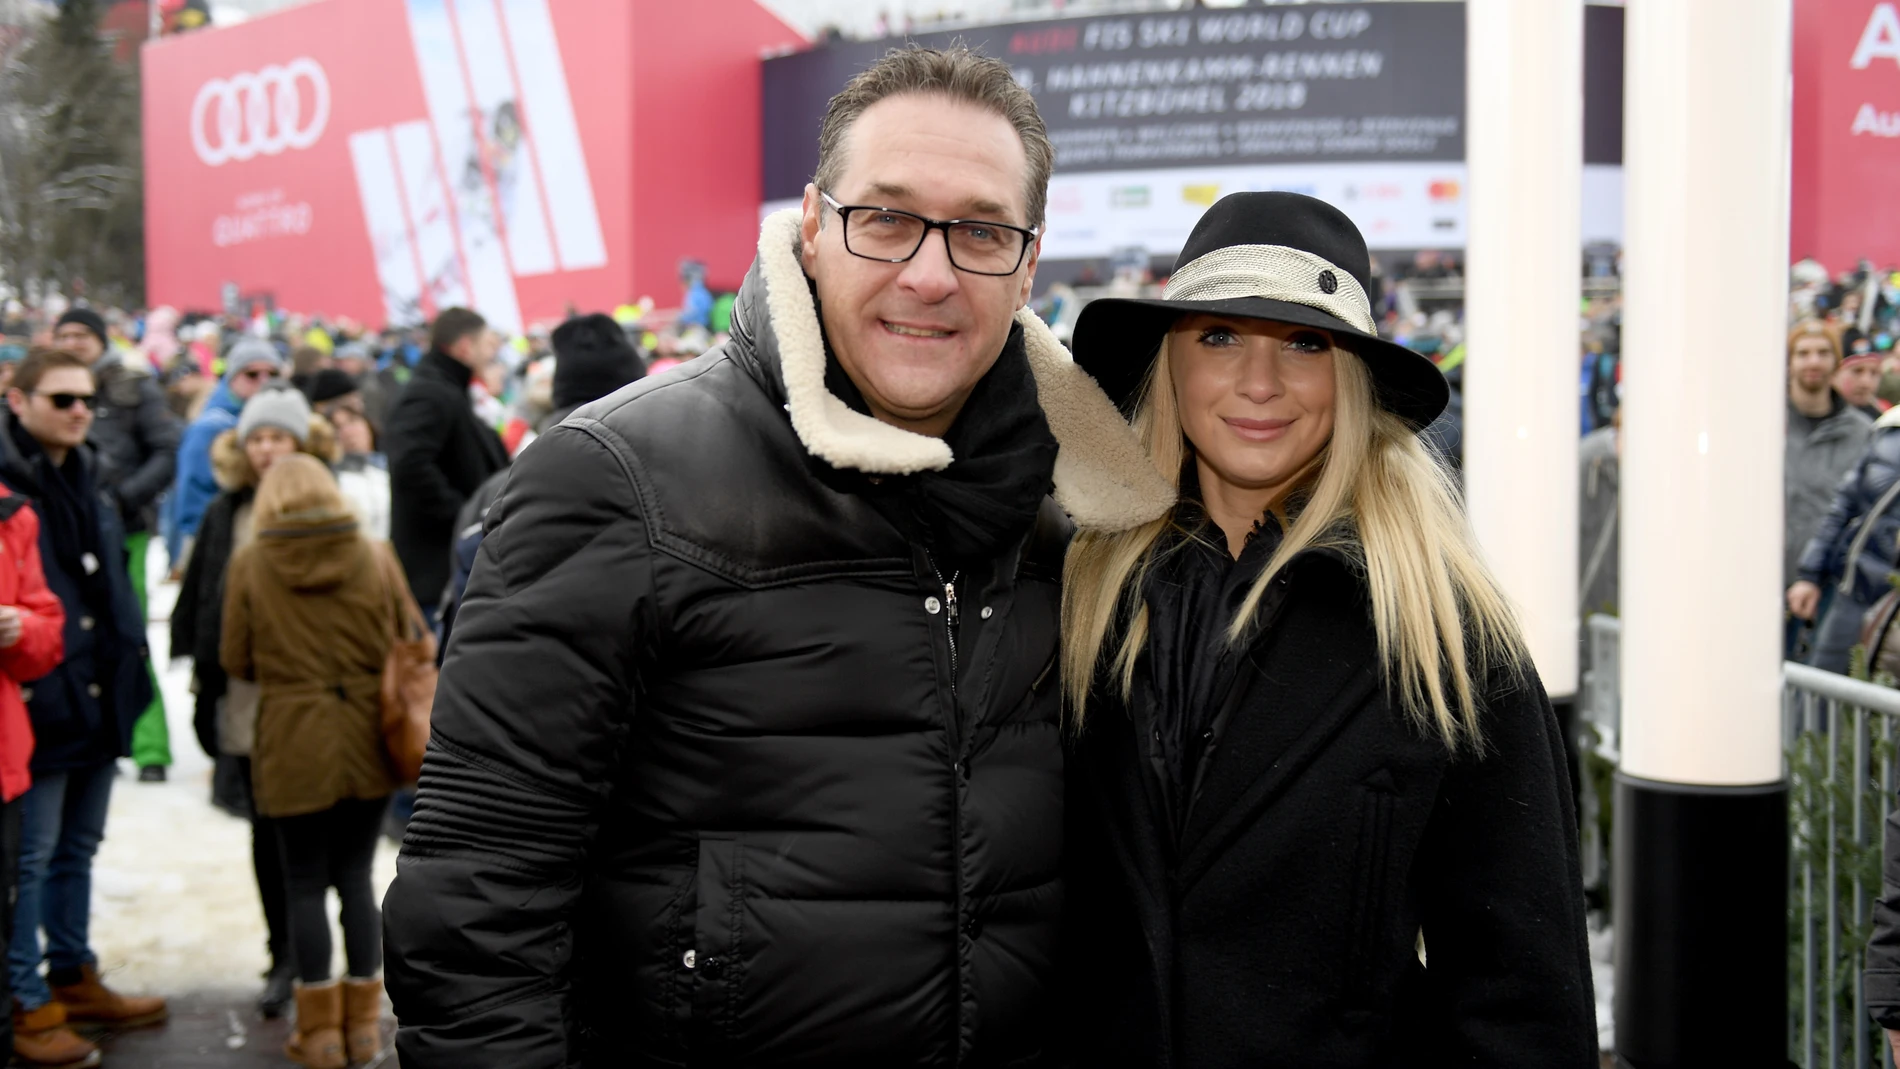 Heinz-Christian Strache and his wife Philippa